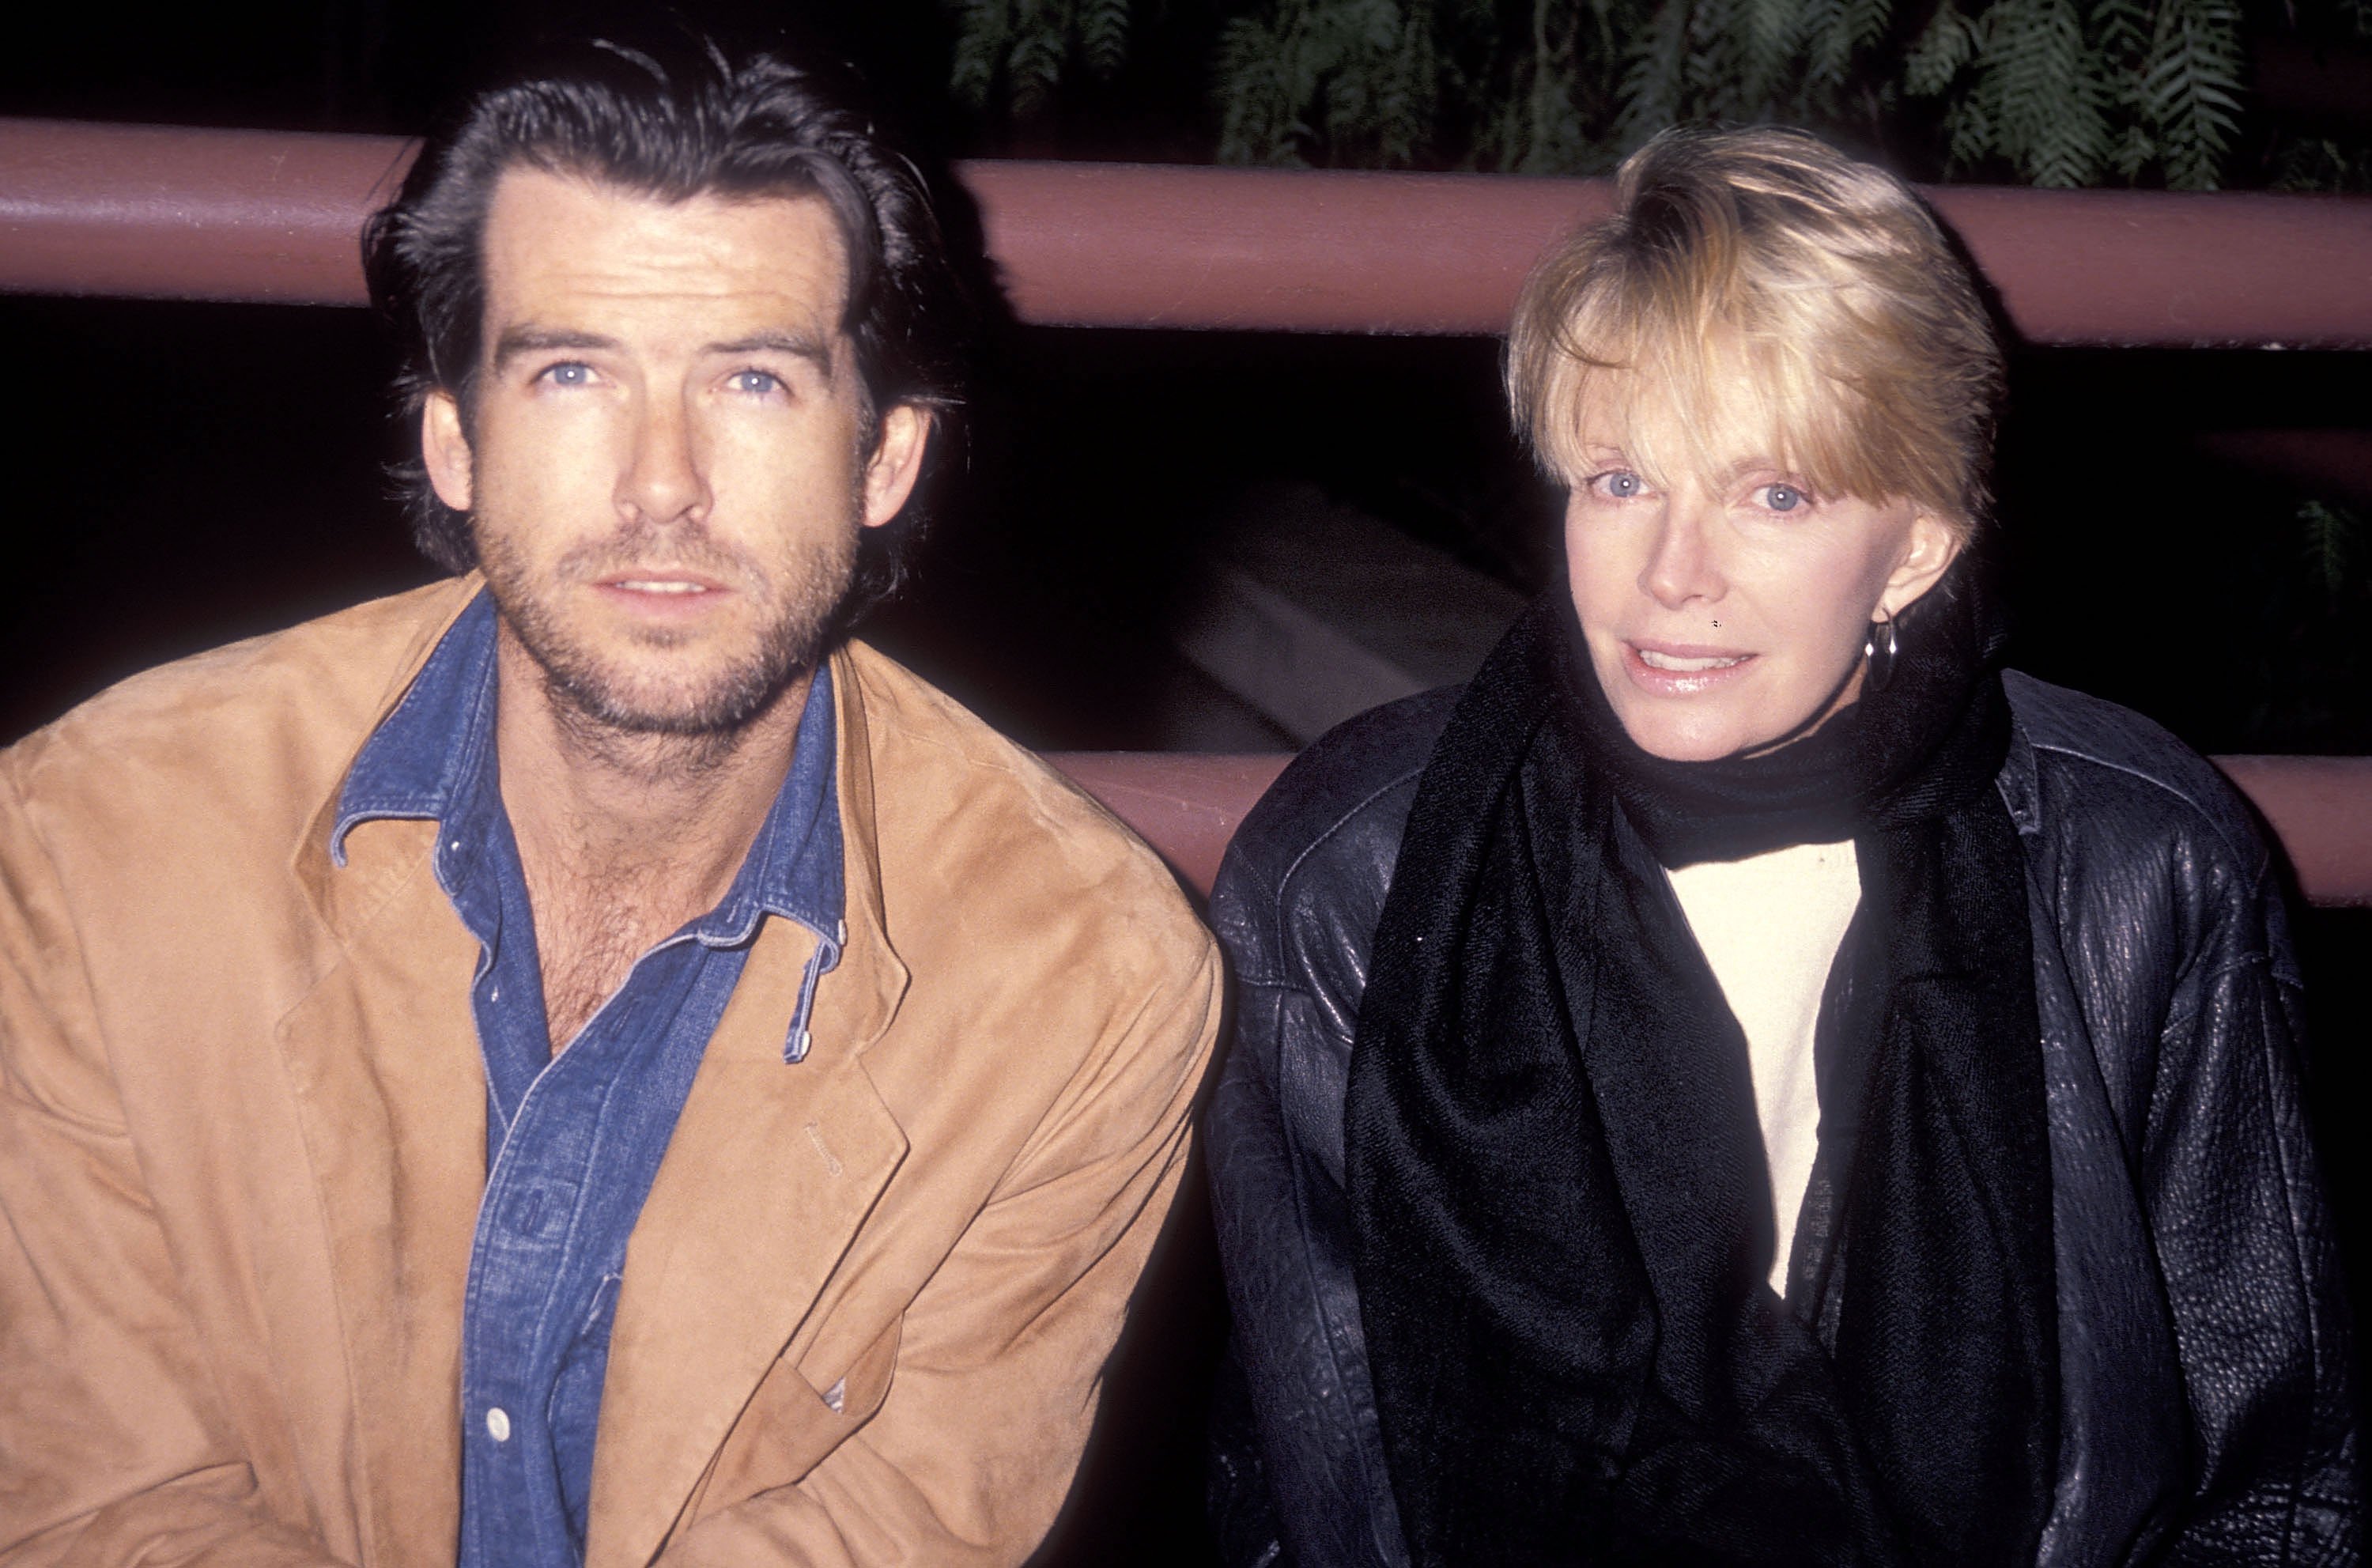 Pierce Brosnan and Cassandra Harris at the pizza party for the Teenage Mutant Ninja Turtle's "Coming Out of Their Shells" Rock & Roll Tour on November 21, 1990 | Source: Getty Images